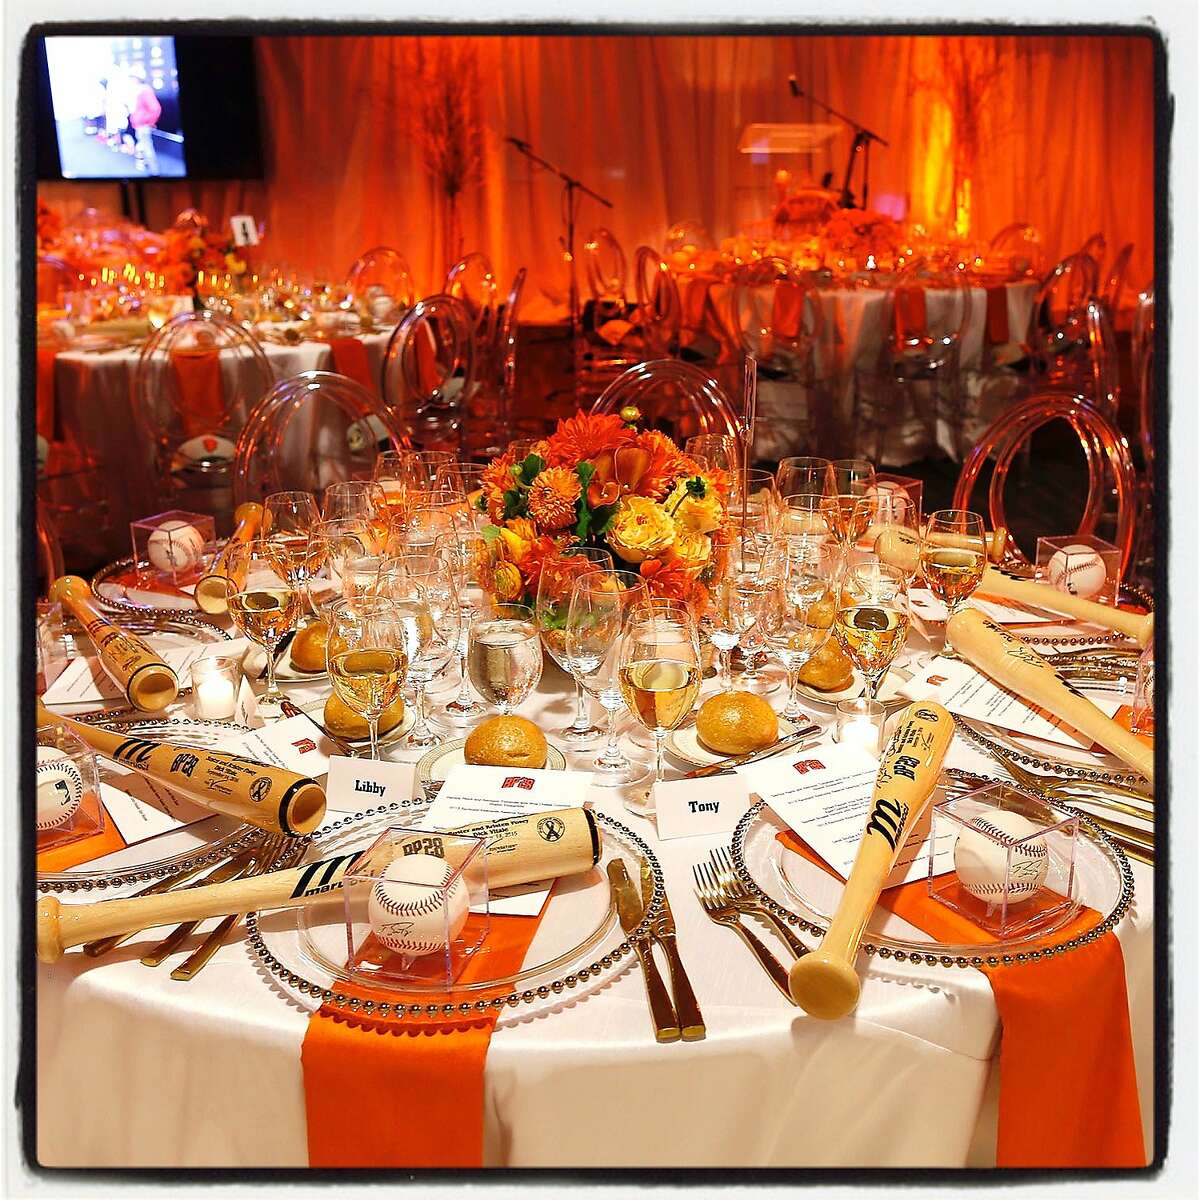 The SF Giants created its inaugural gala at the ballpark to support raising pediatric cancer research funds for the The Posey Family Foundation. Sept 2016.